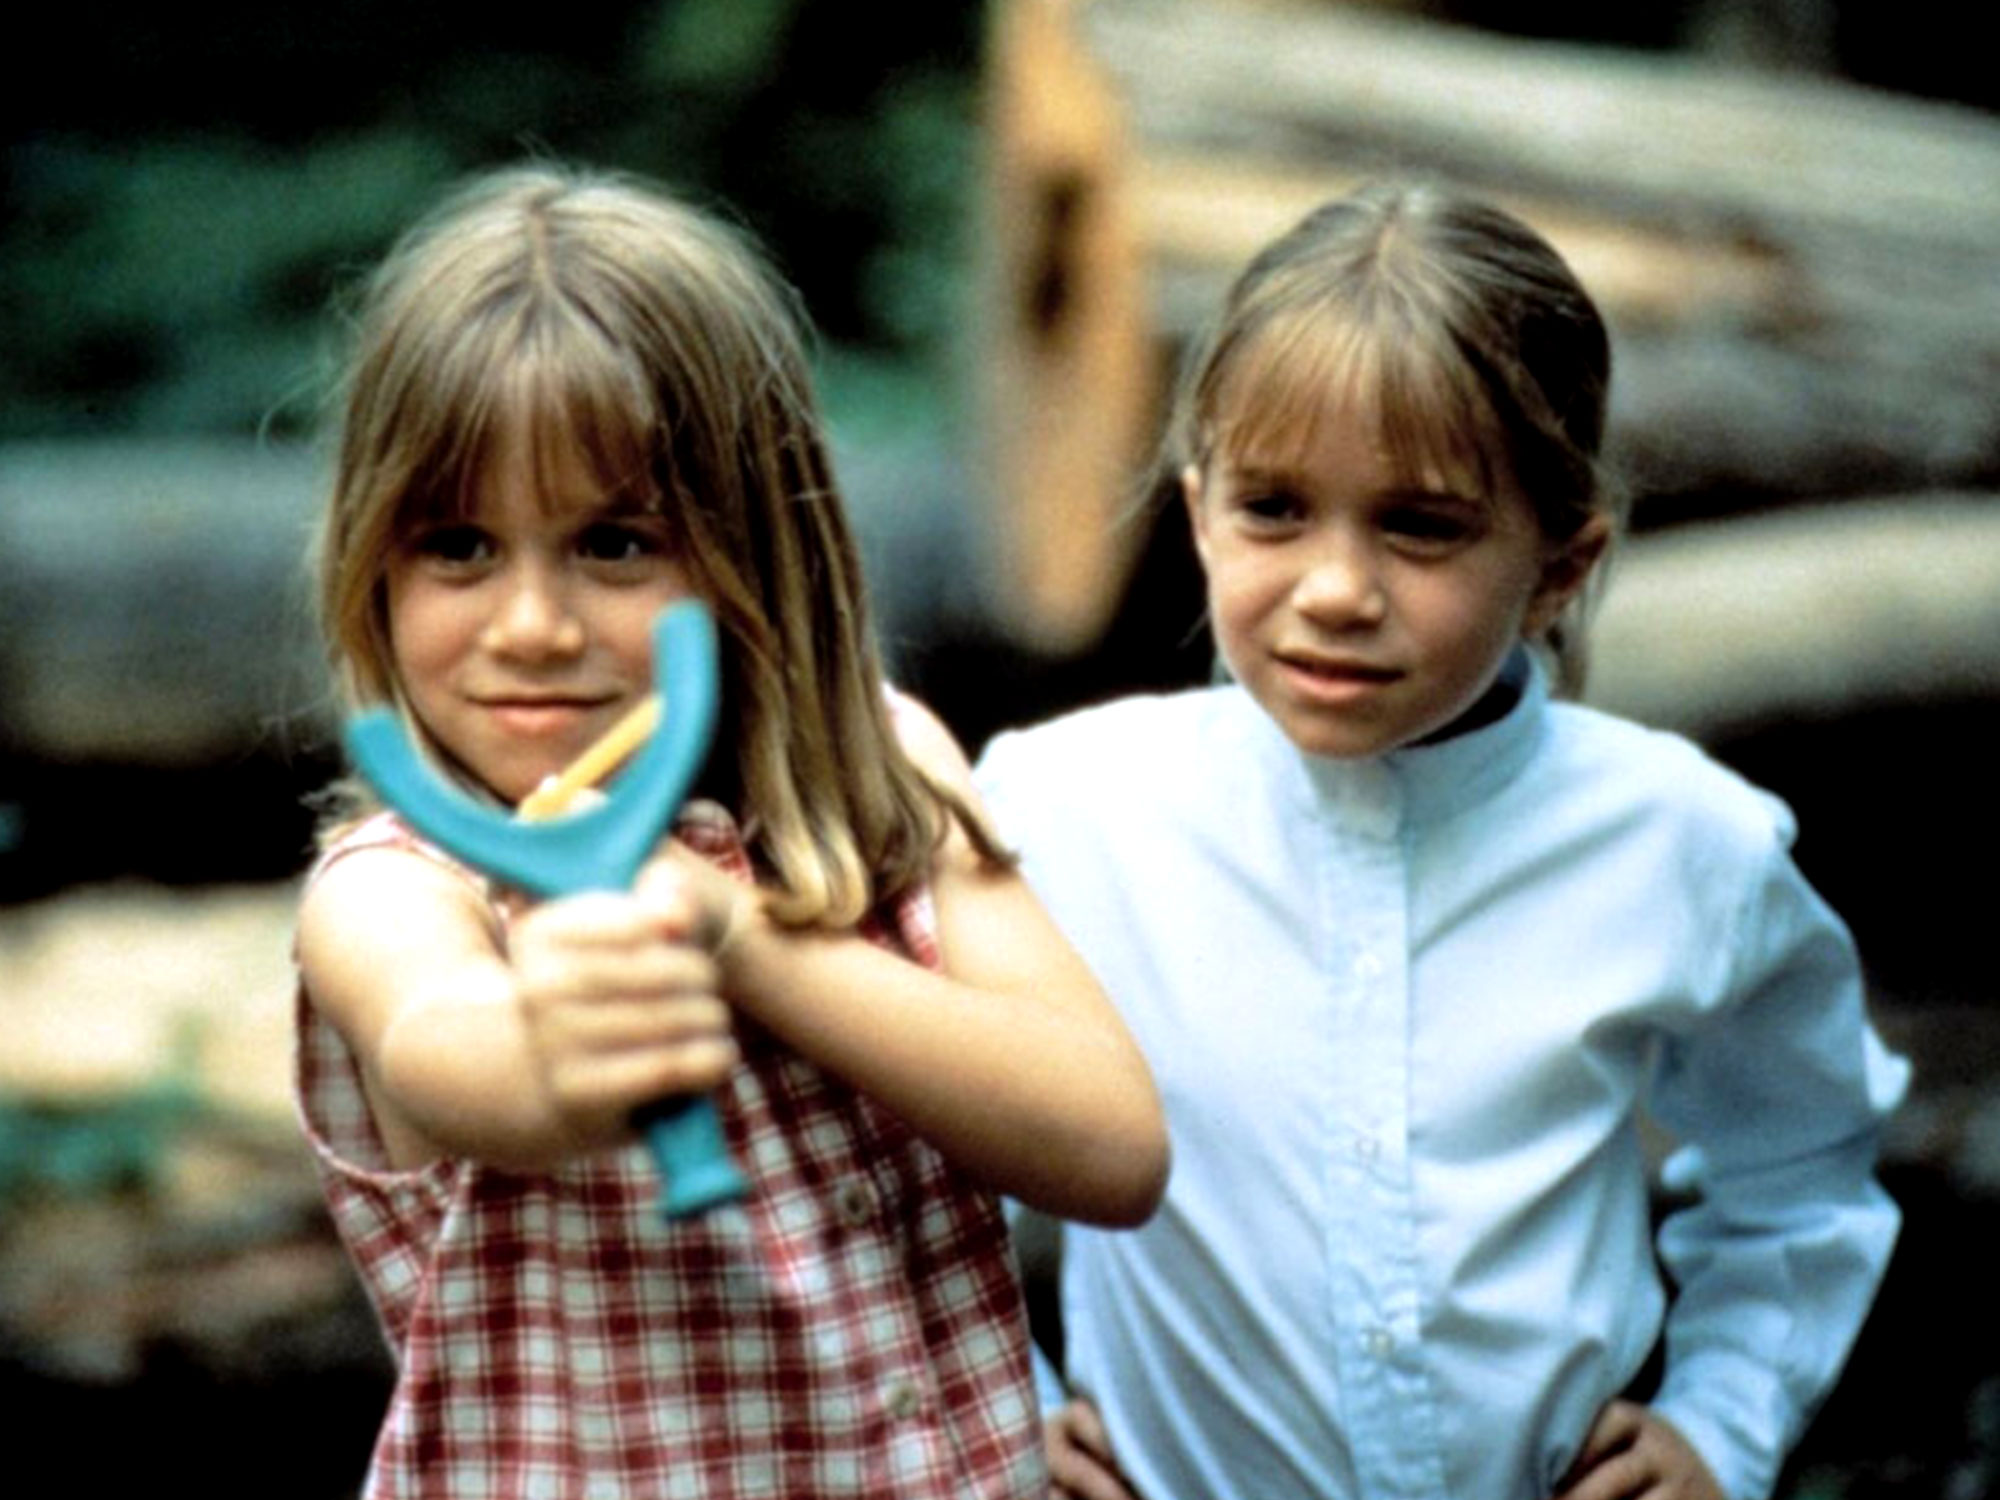 Did the Olsen twins ever make a great film?